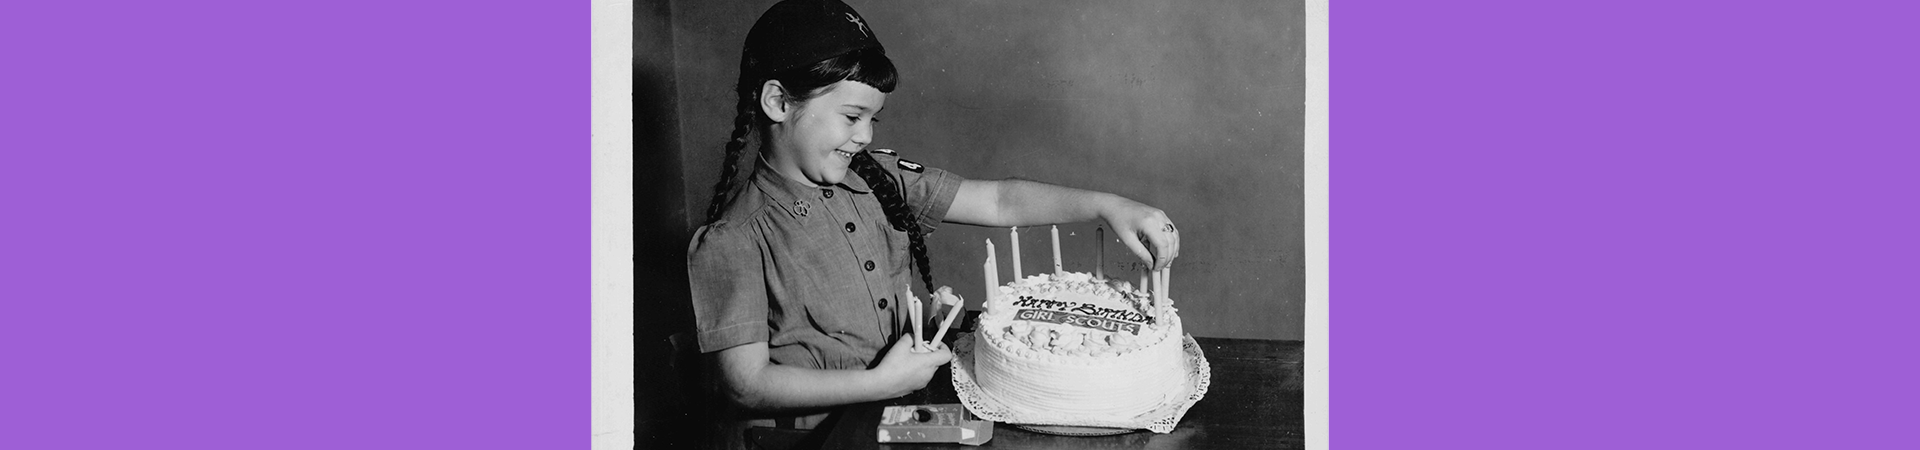  vintage girl scout photos of girl scouts decorating birthday cakes 